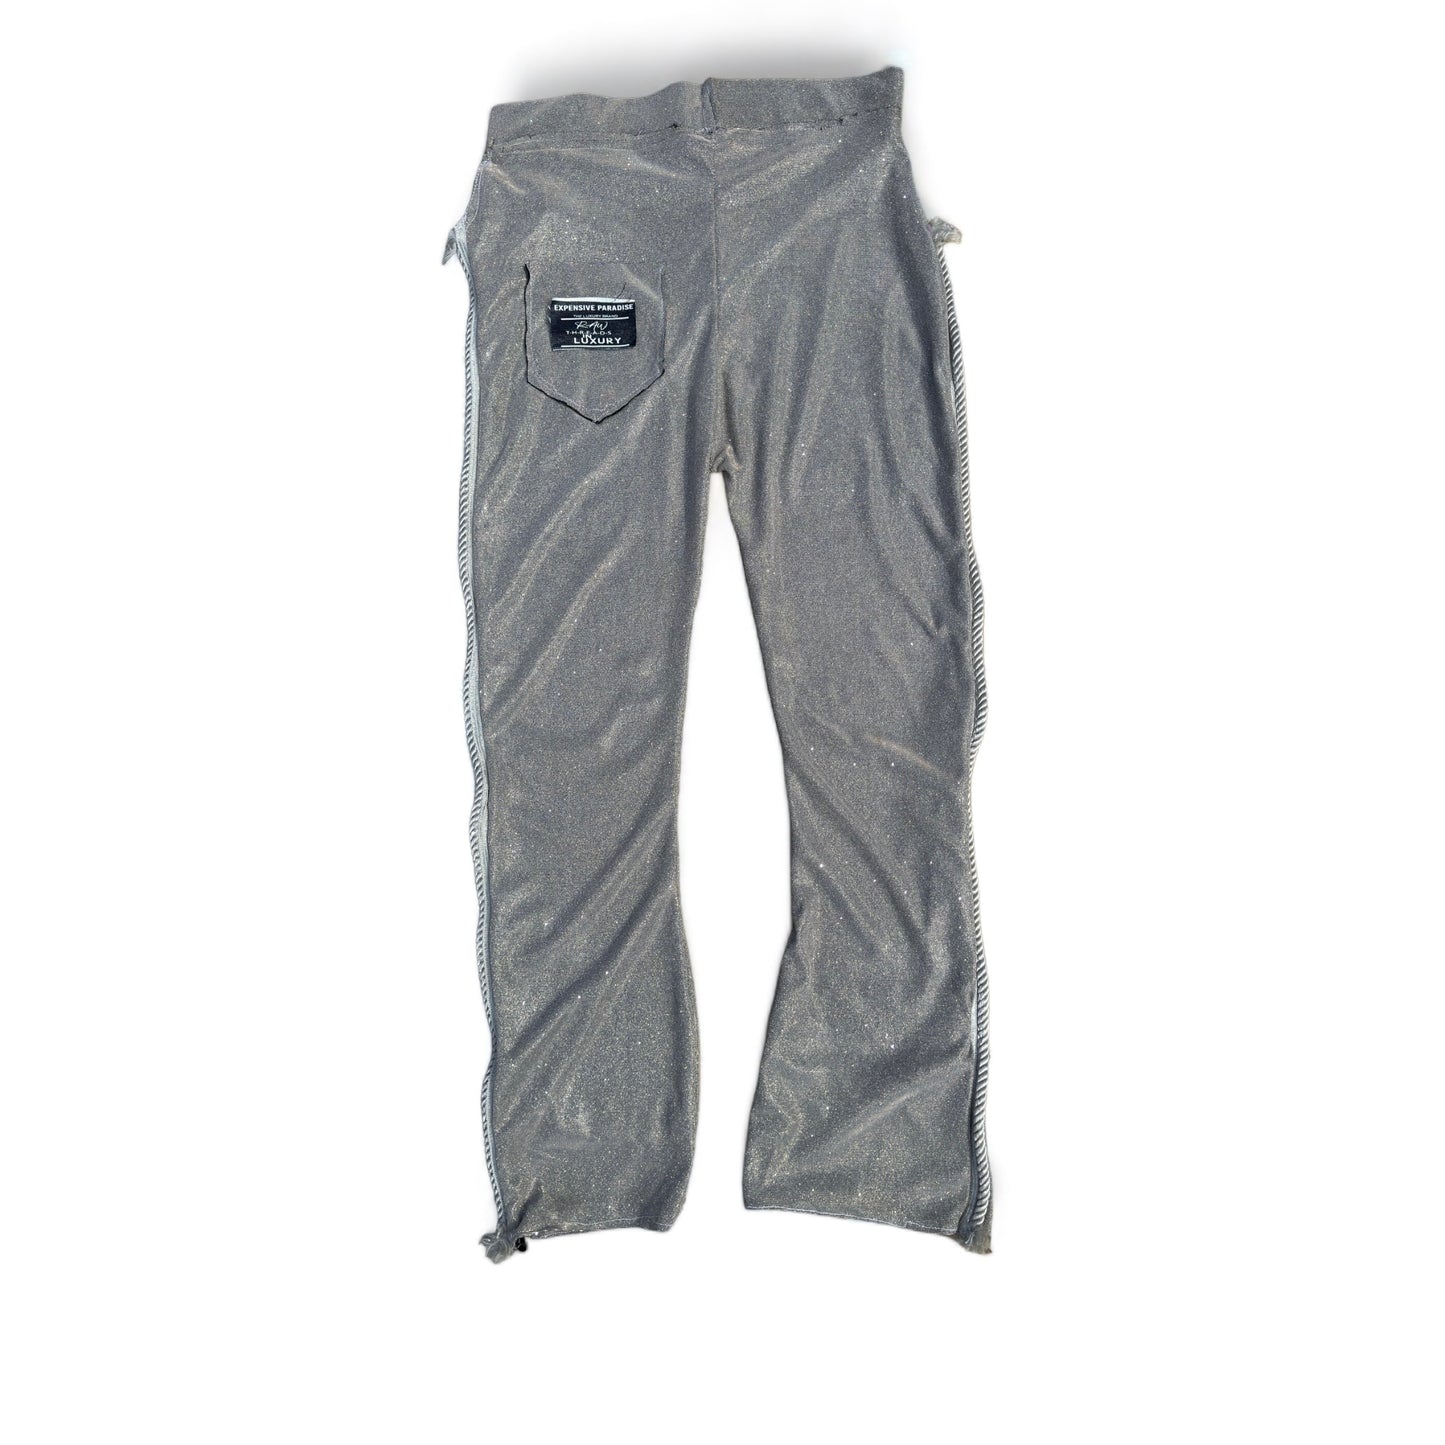 EXPENSIVE PARADISE - "EXPENSIVE COMFORT" (RELAX LUXURY PANTS) COLOR: METALLIC SLIVER